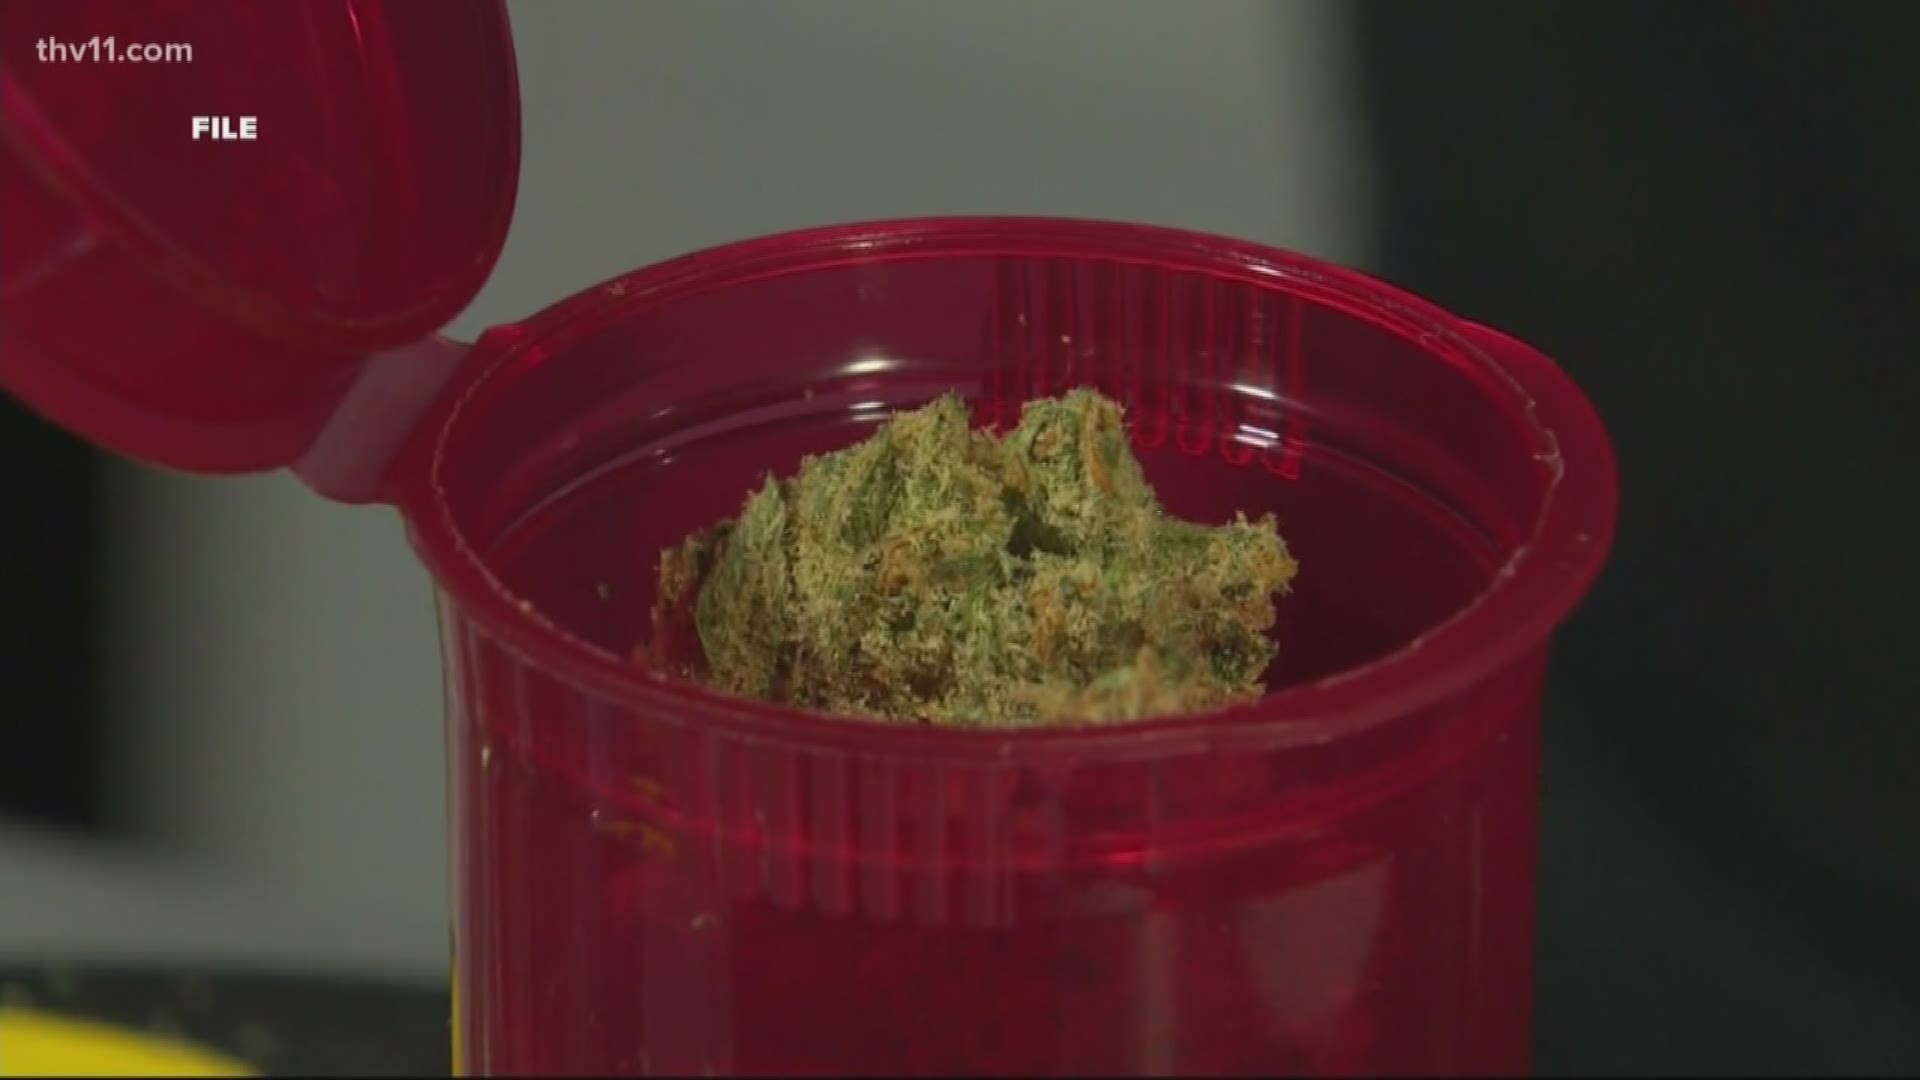 It's been just over one year since the Medical Marijuana Commission issued licenses for 32 dispensaries in Arkansas. Nearly half of those remain unopened.